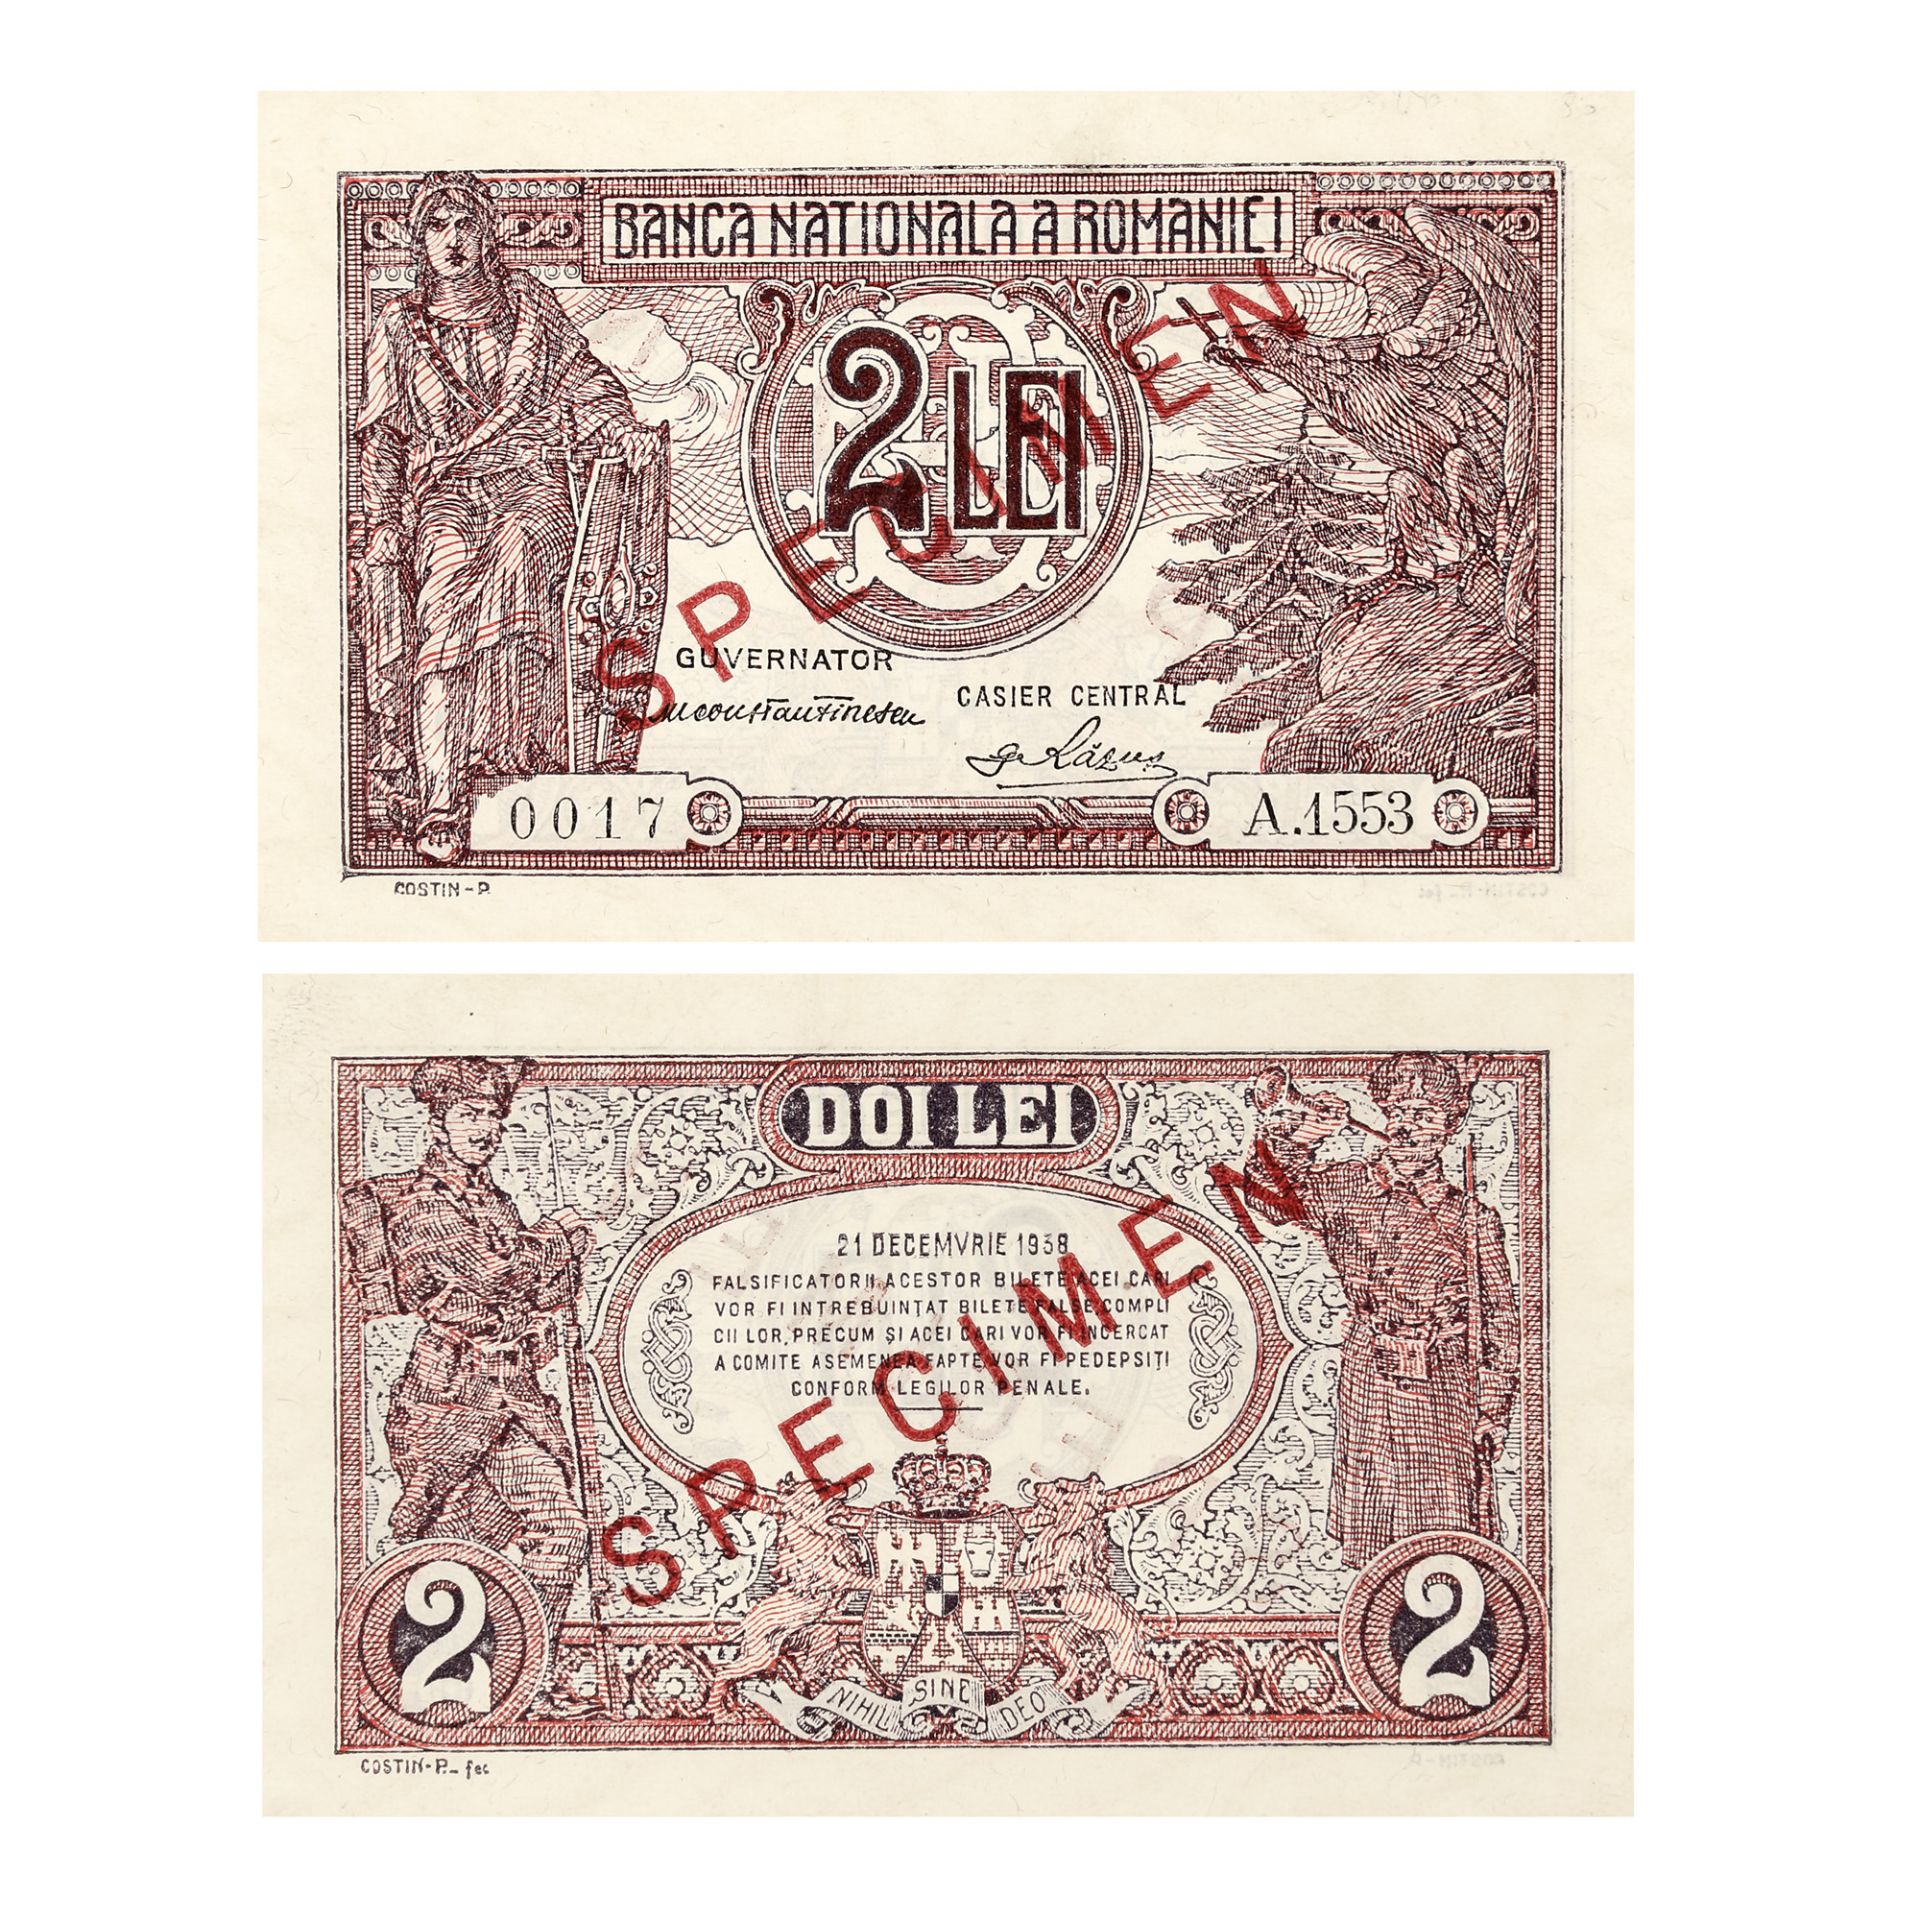 Lot consisting of twelve specimen banknotes, issued by the National Bank of Romania, 1931-1996 - Image 13 of 13